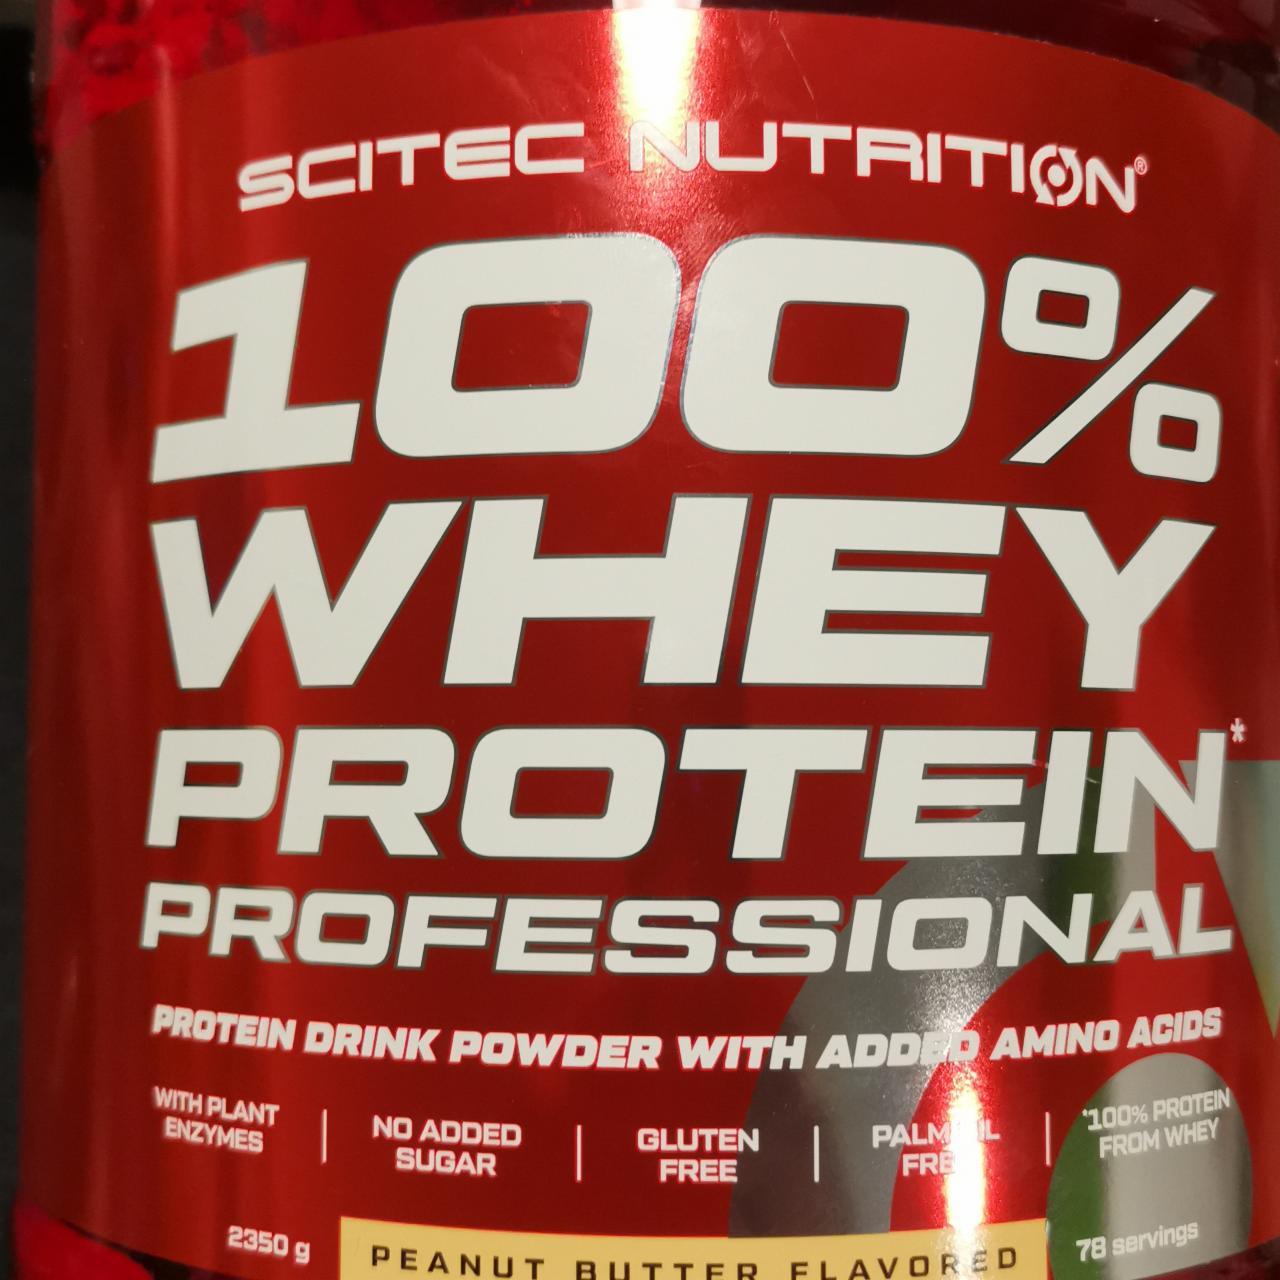 Fotografie - 100% Whey protein professional Peanut butter flavored Scitec Nutrition